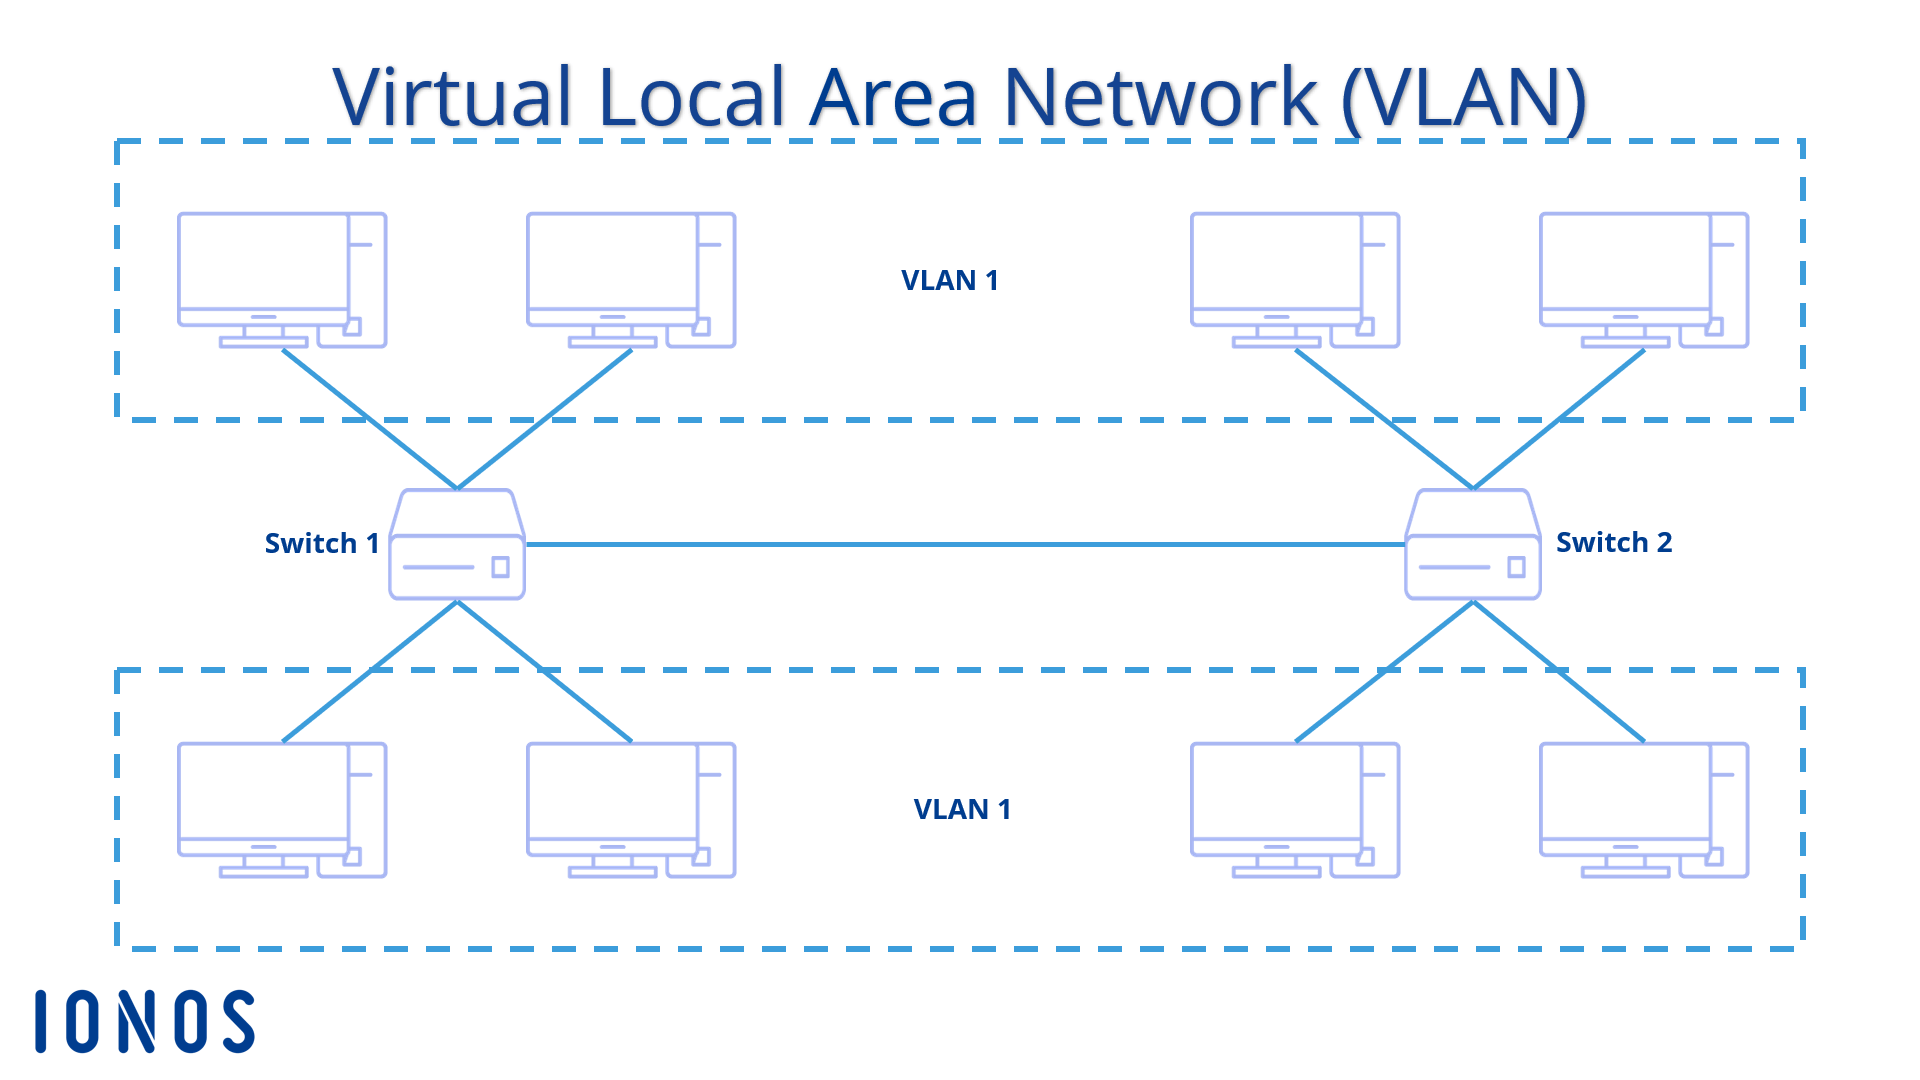 Schematic configuration of two VLANs